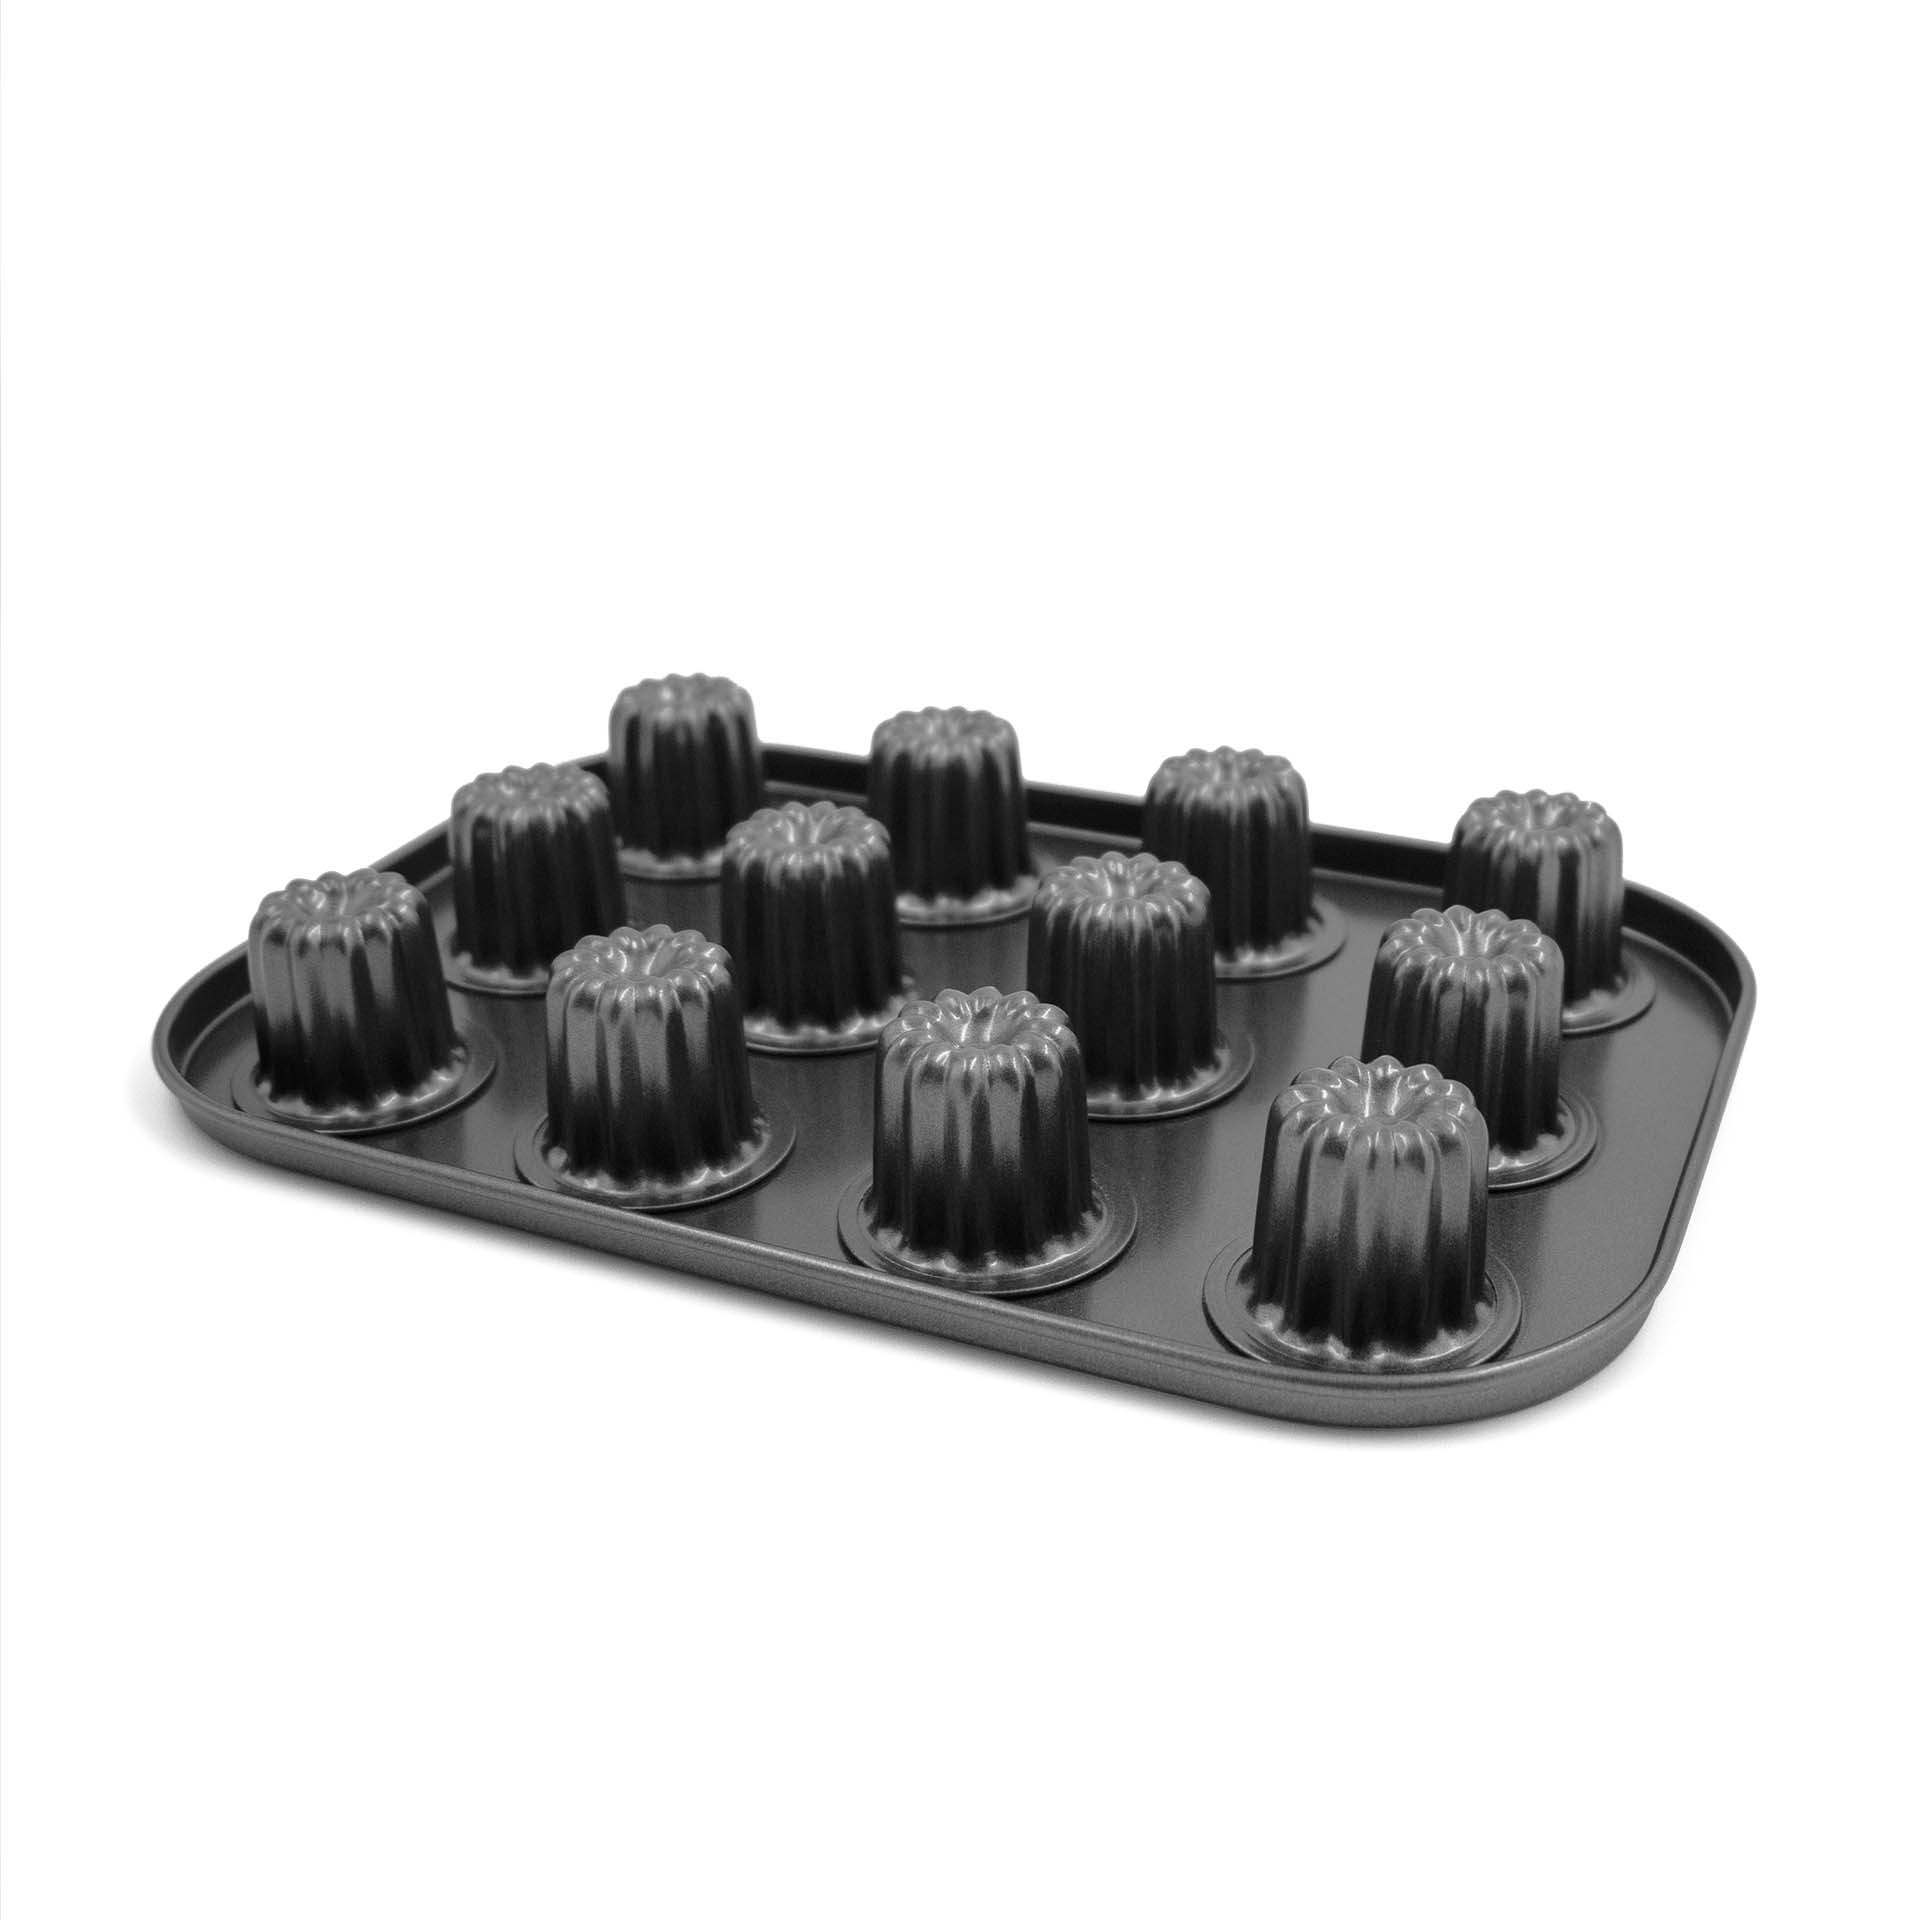 ALKO 12-cup non-stick Canelé Fluted Molds Baking Tray